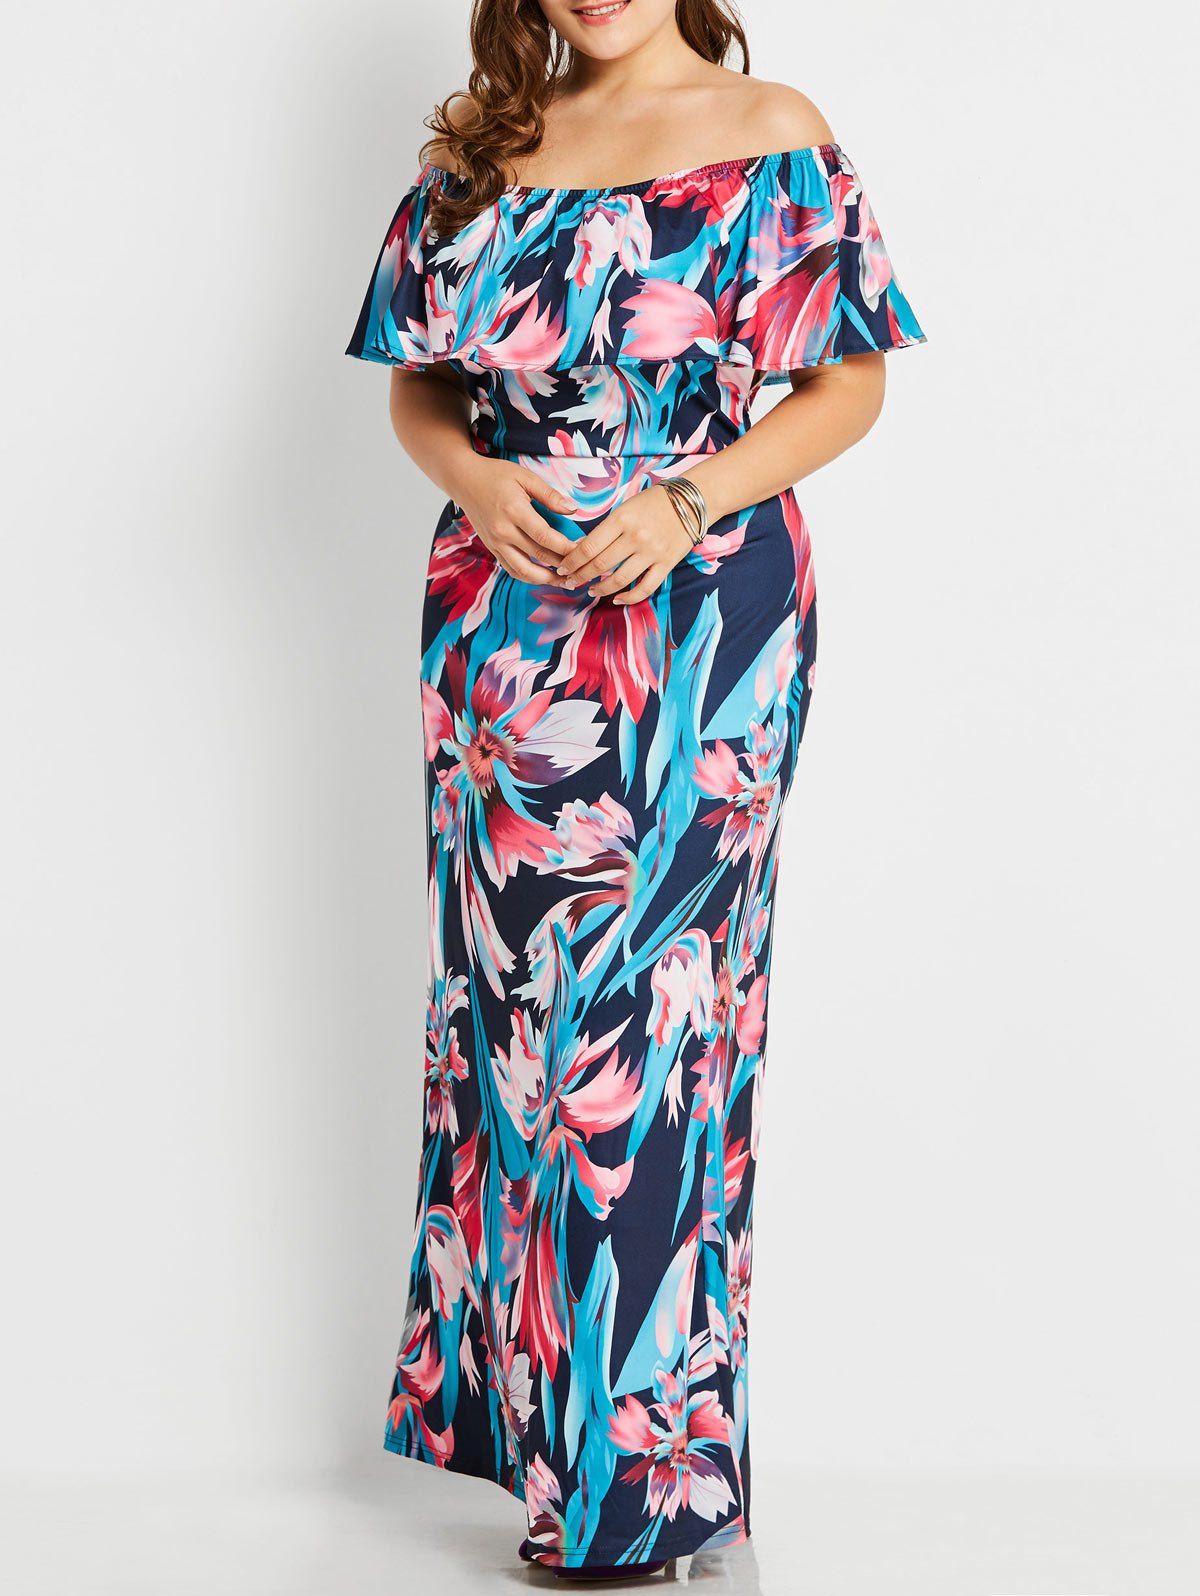 2018 Overlay Plus Size Tropical Off The Shoulder Maxi Dress FLORAL XL ...